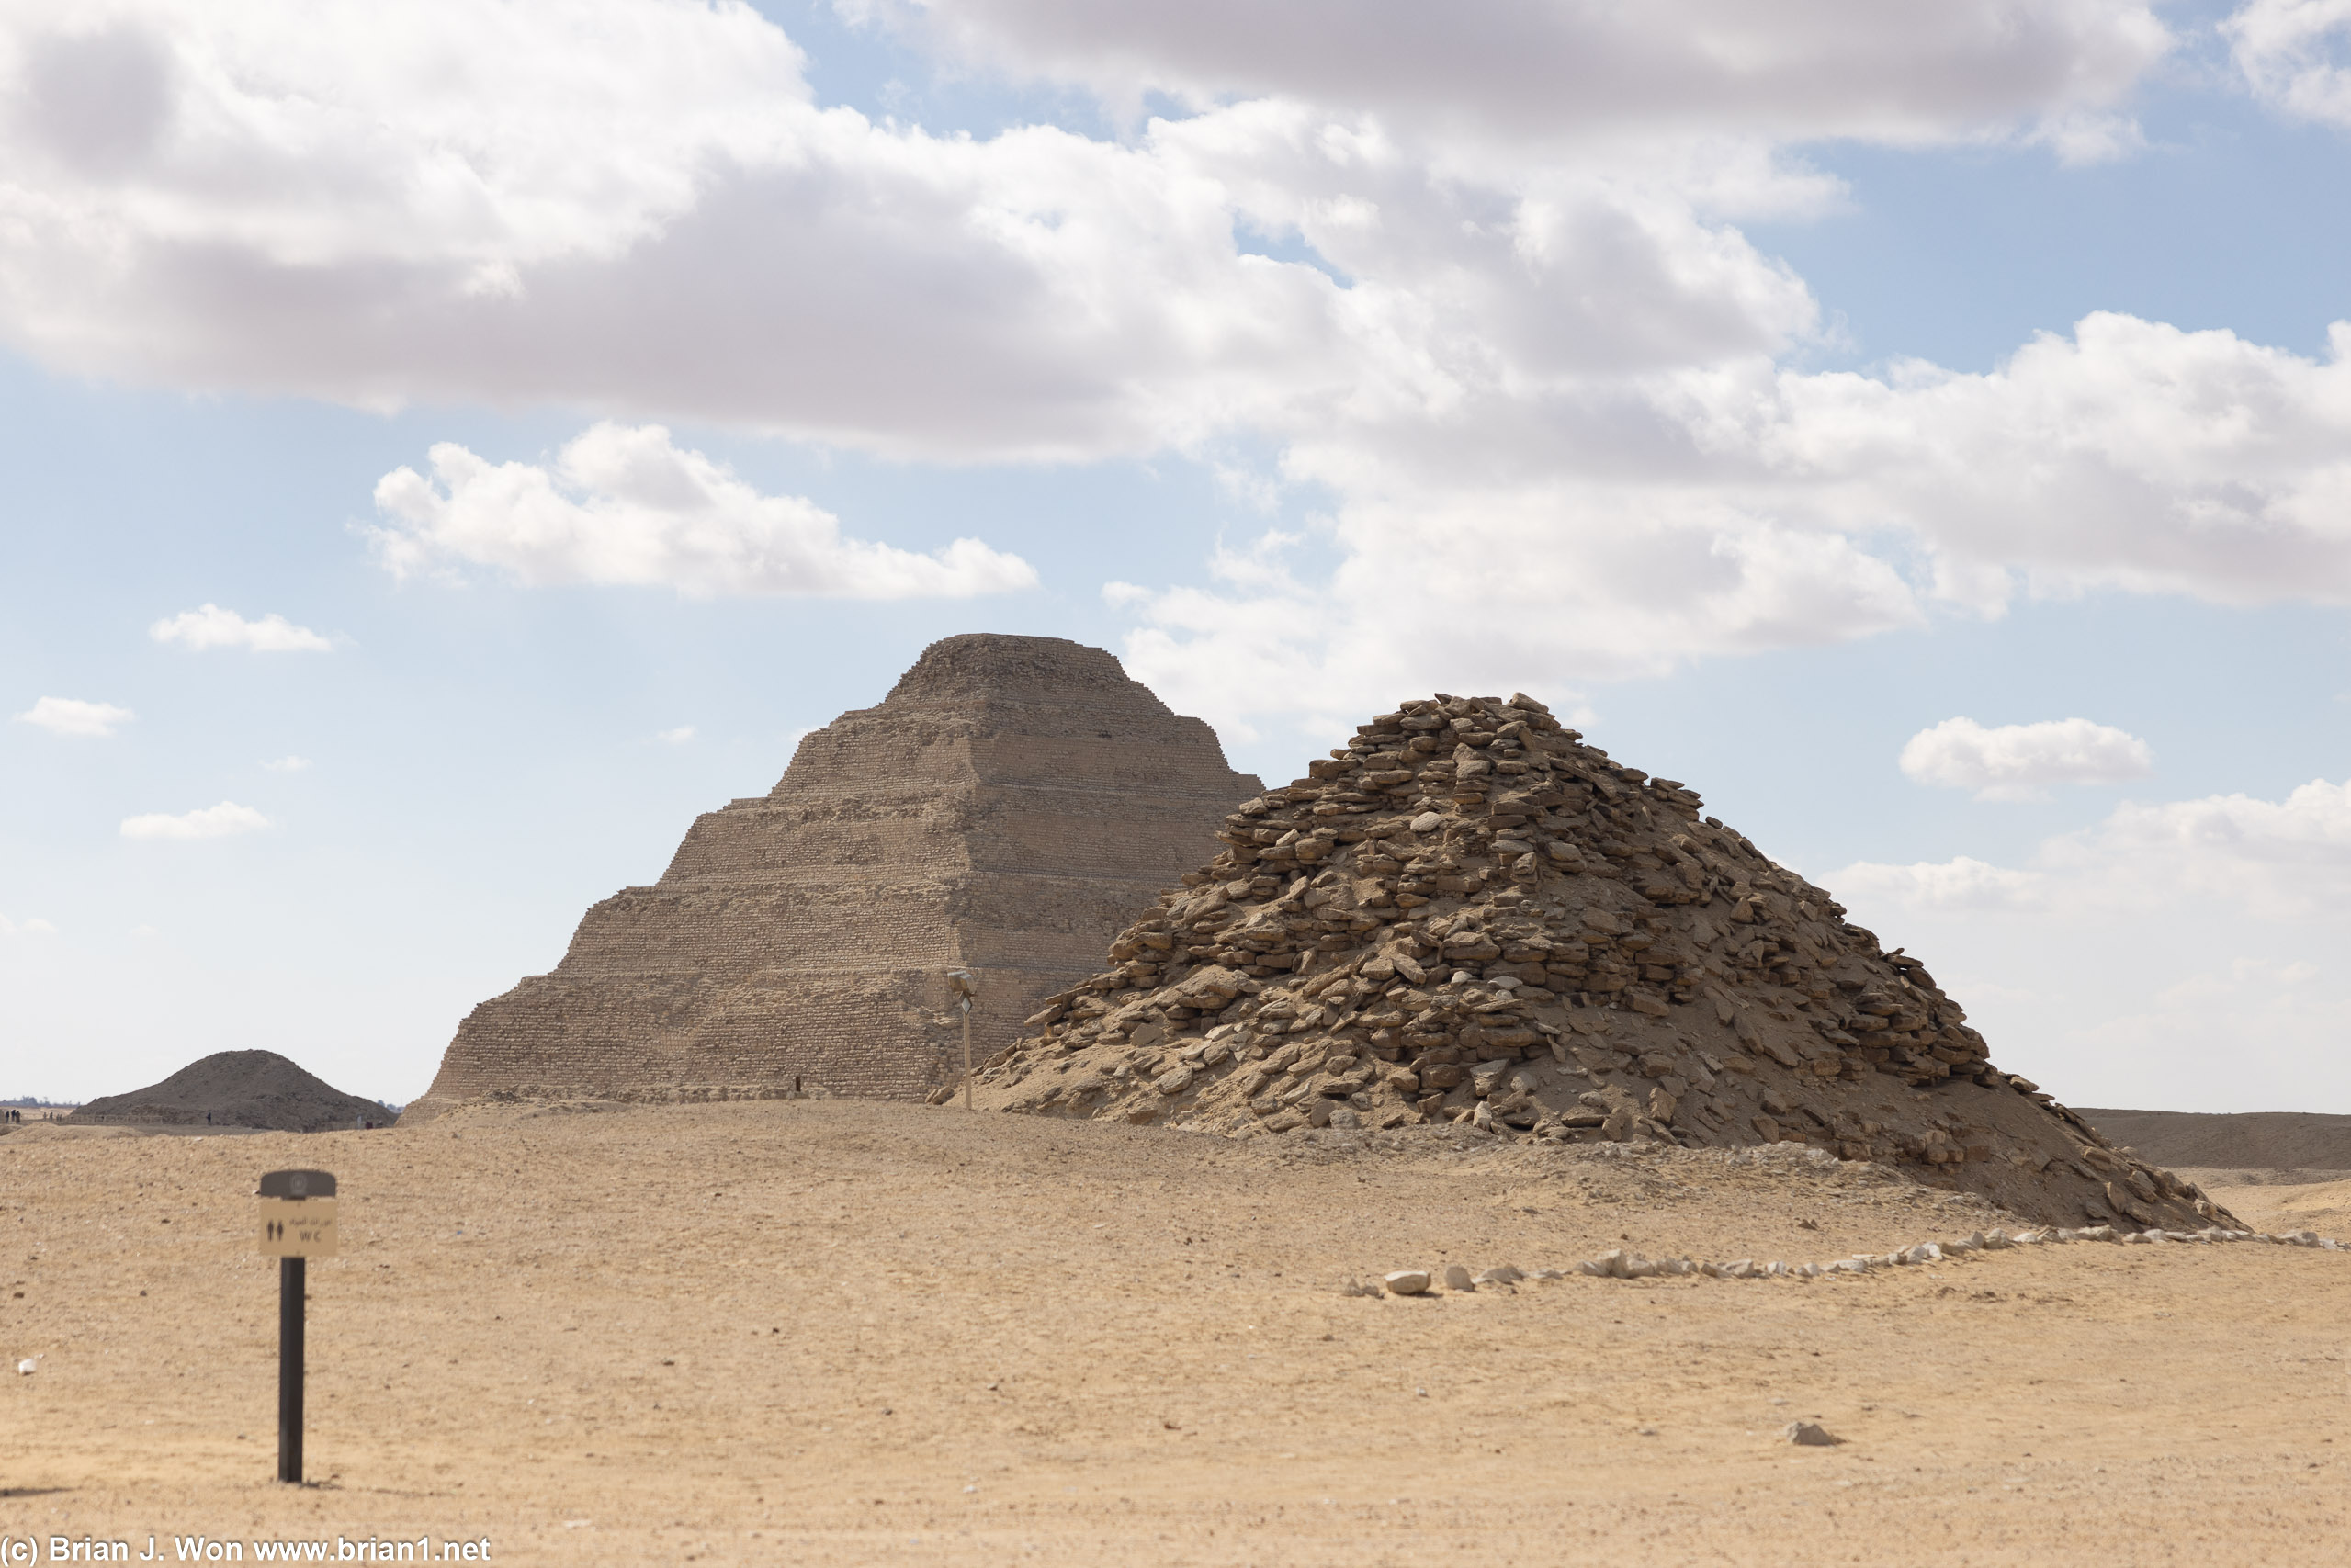 The foreground pyramid is why you don't build them out of sandstone.